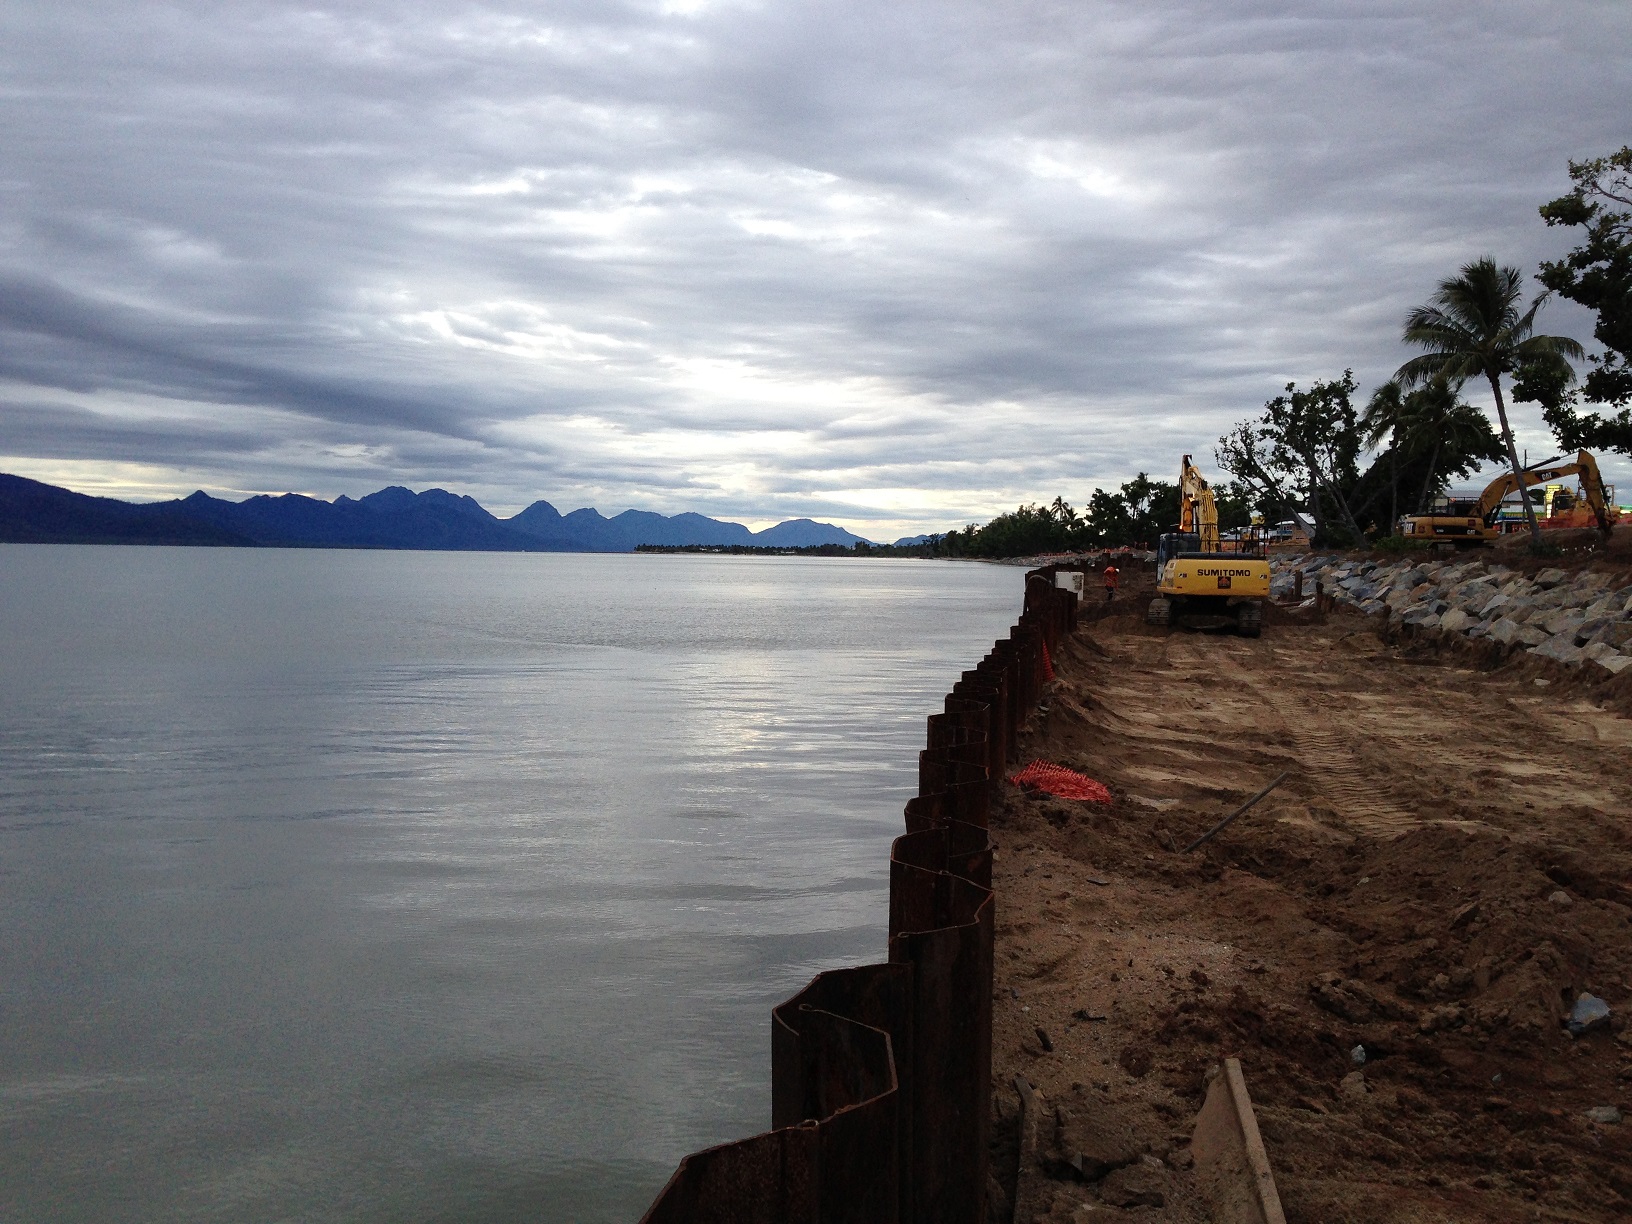 An excavator placing rocks to construct the new rock seawall